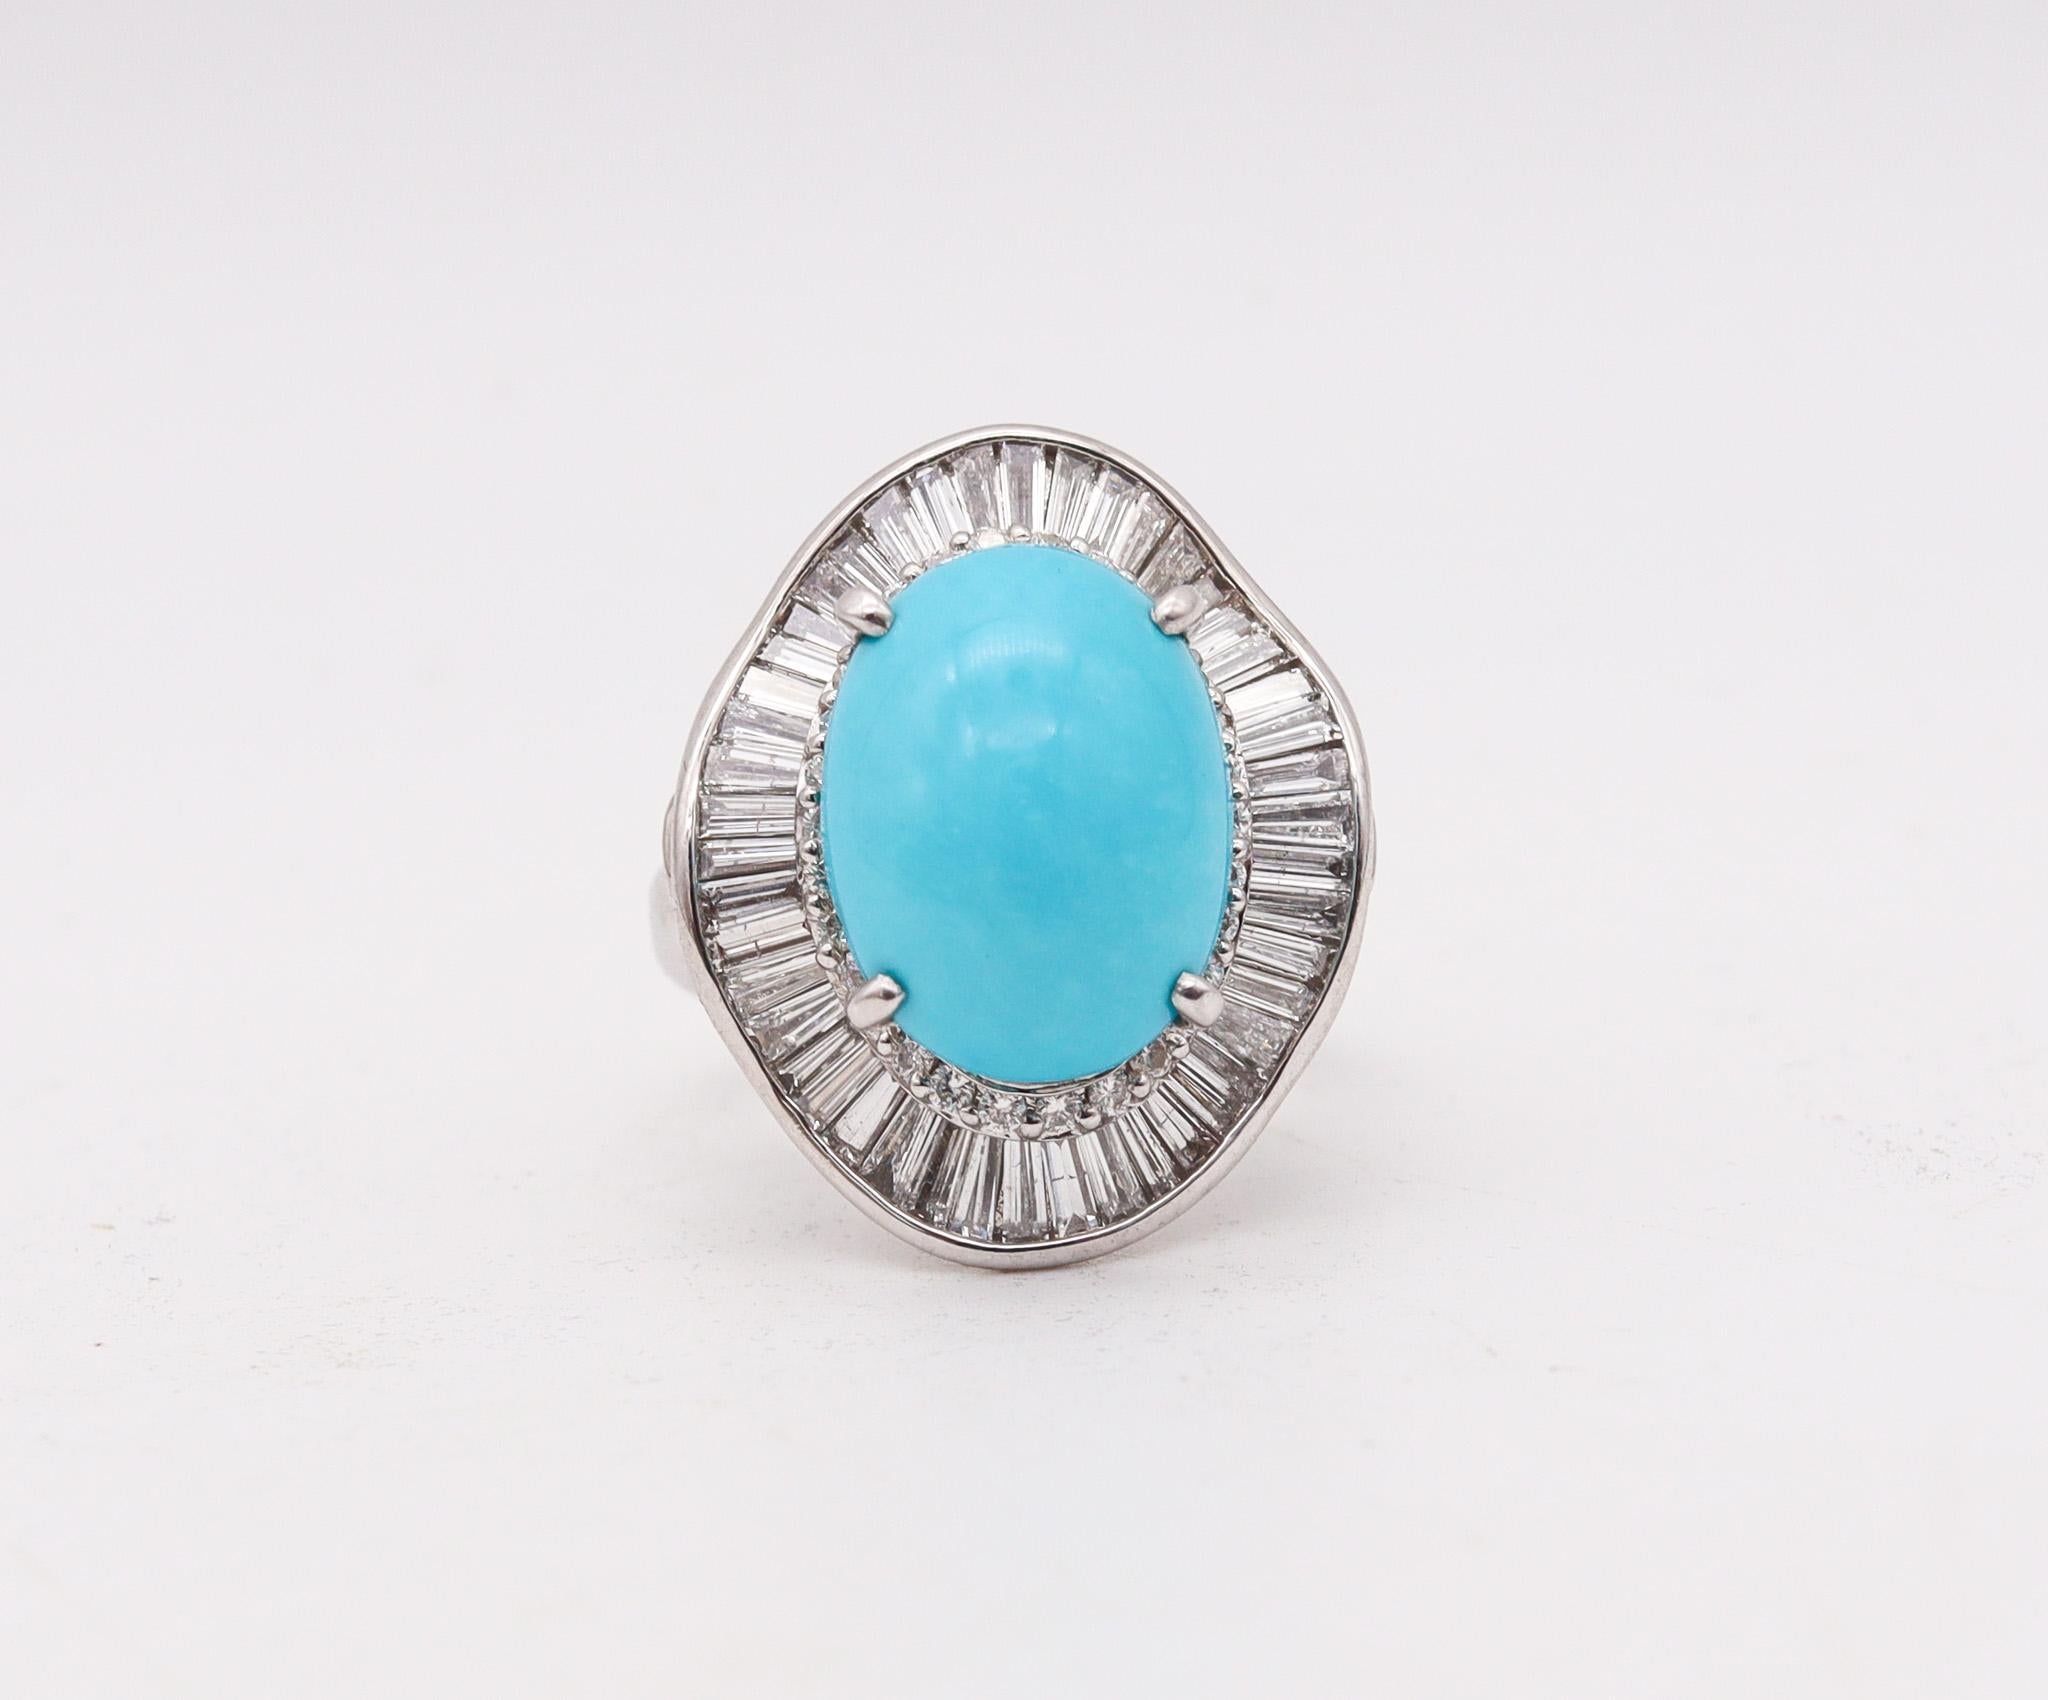 Modernist Ballerina Cocktail Ring In Solid Platinum With 10.02 Ctw Diamonds And Turquoise For Sale